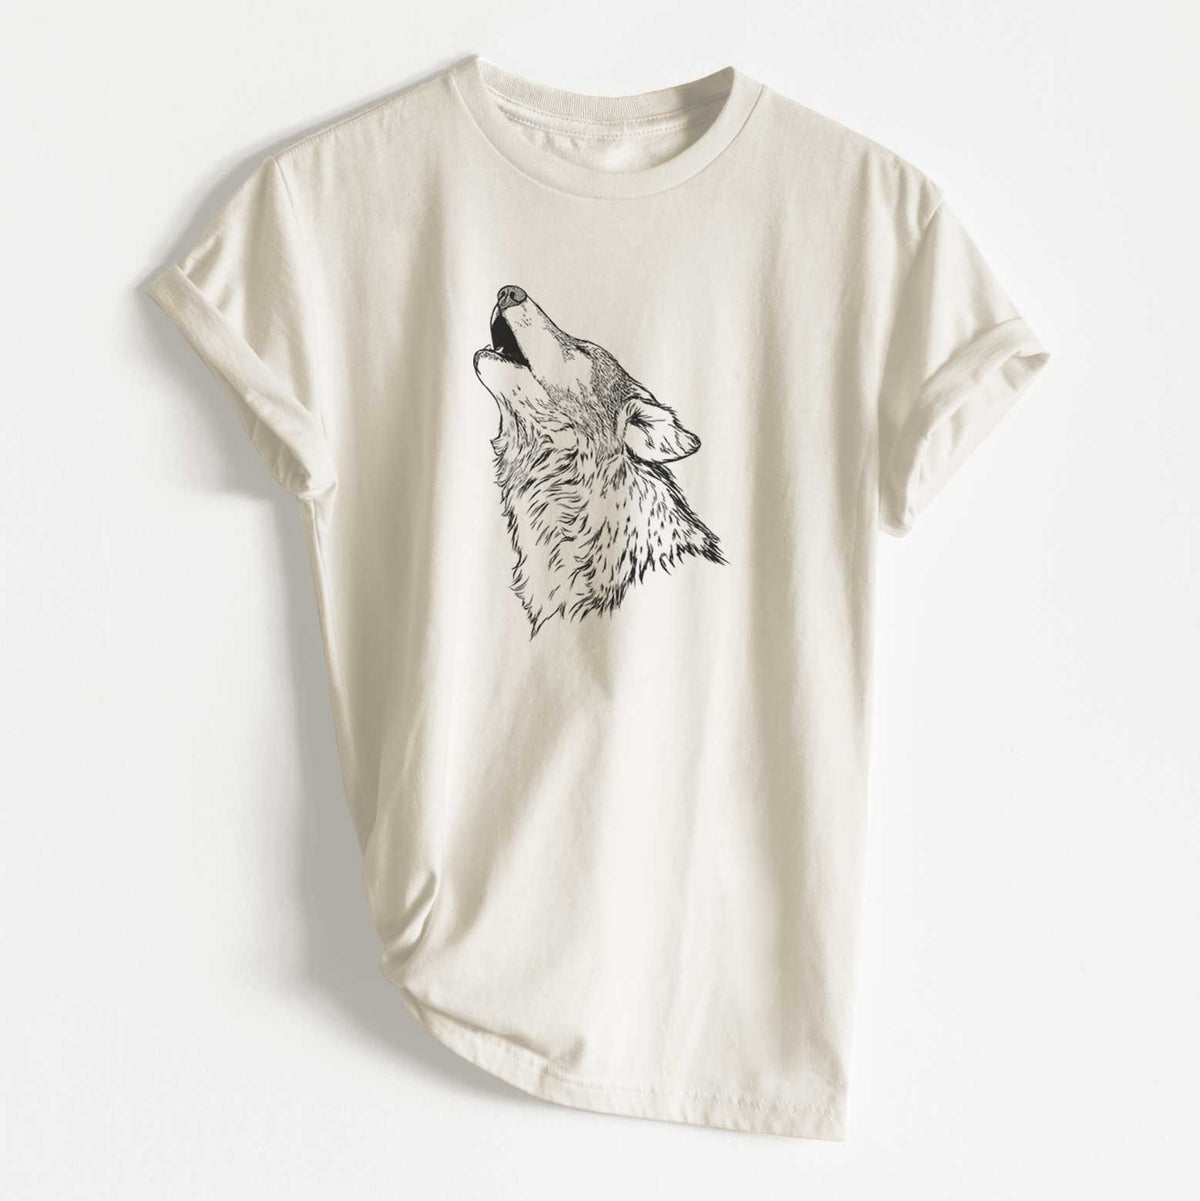 Canis lupus - Grey Wolf Howling - Unisex Recycled Eco Tee  - CLOSEOUT - FINAL SALE